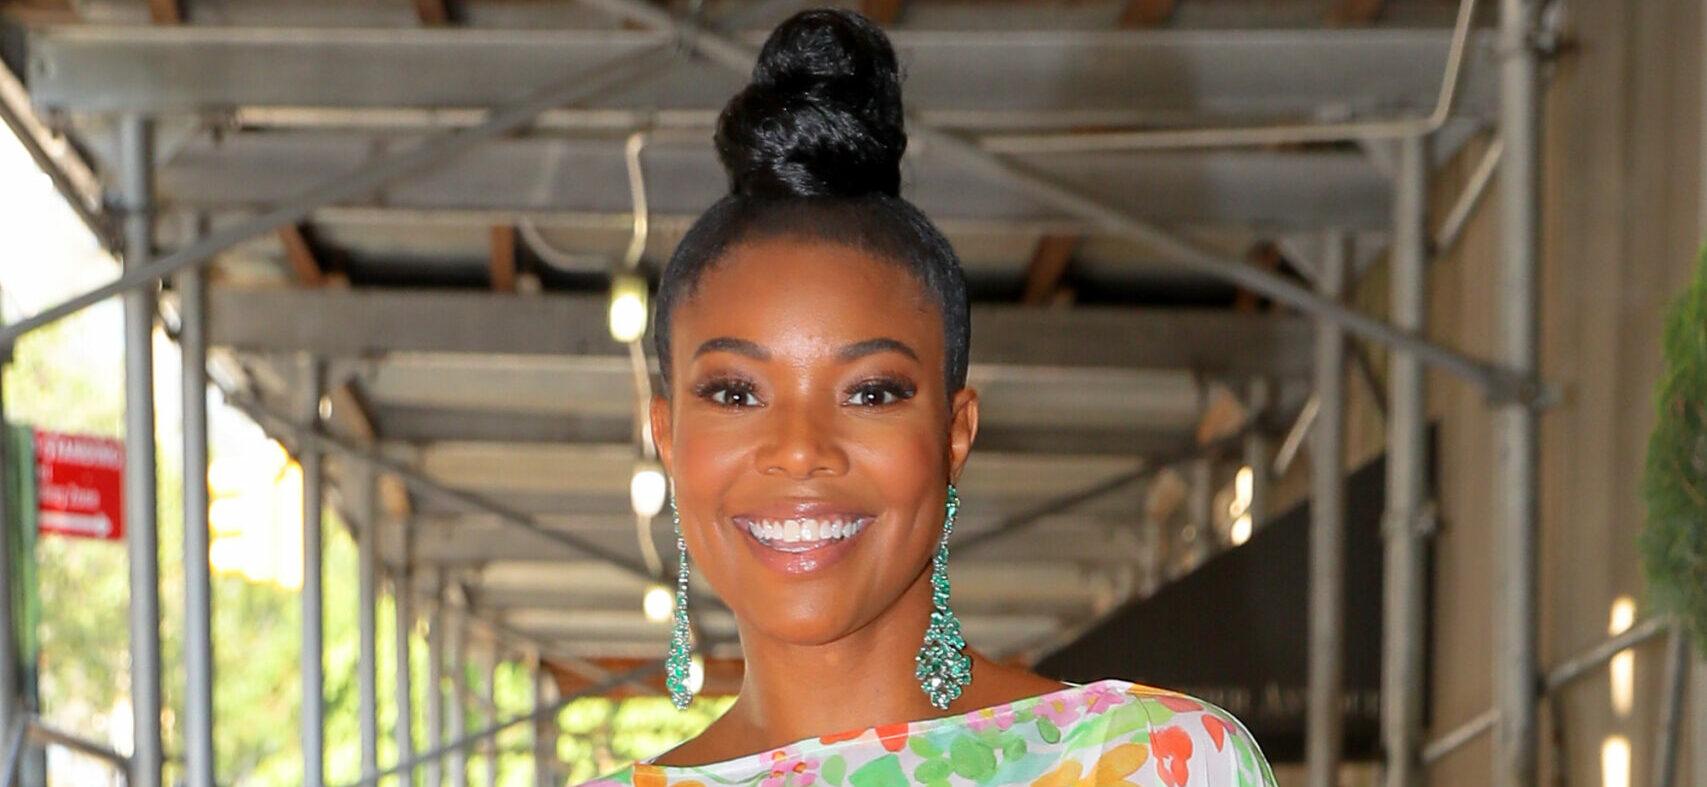 Gabrielle Union is all smiles